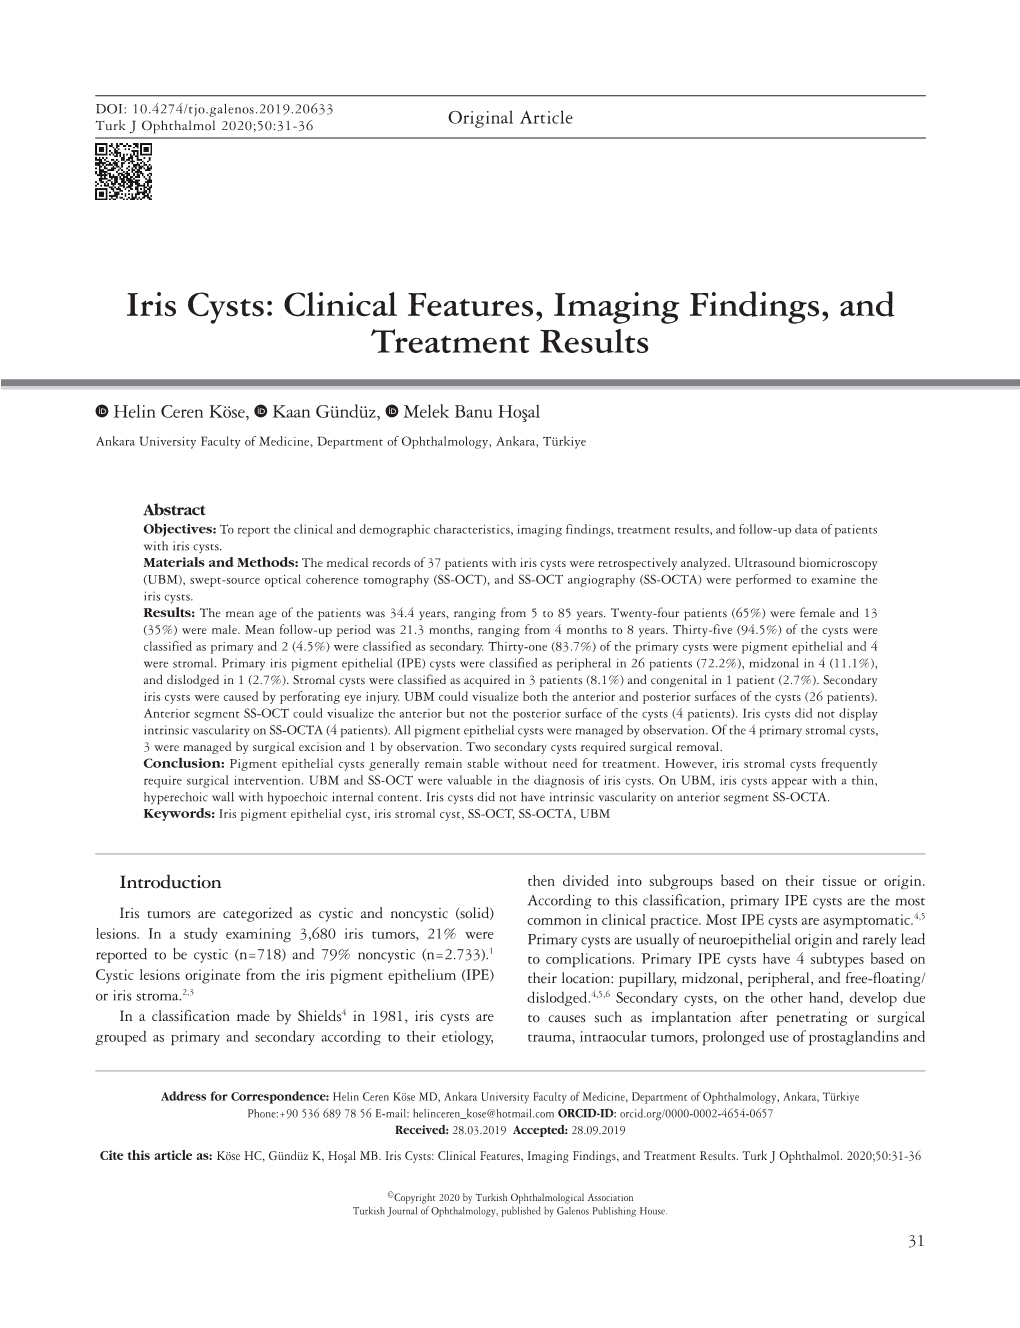 Iris Cysts: Clinical Features, Imaging Findings, and Treatment Results